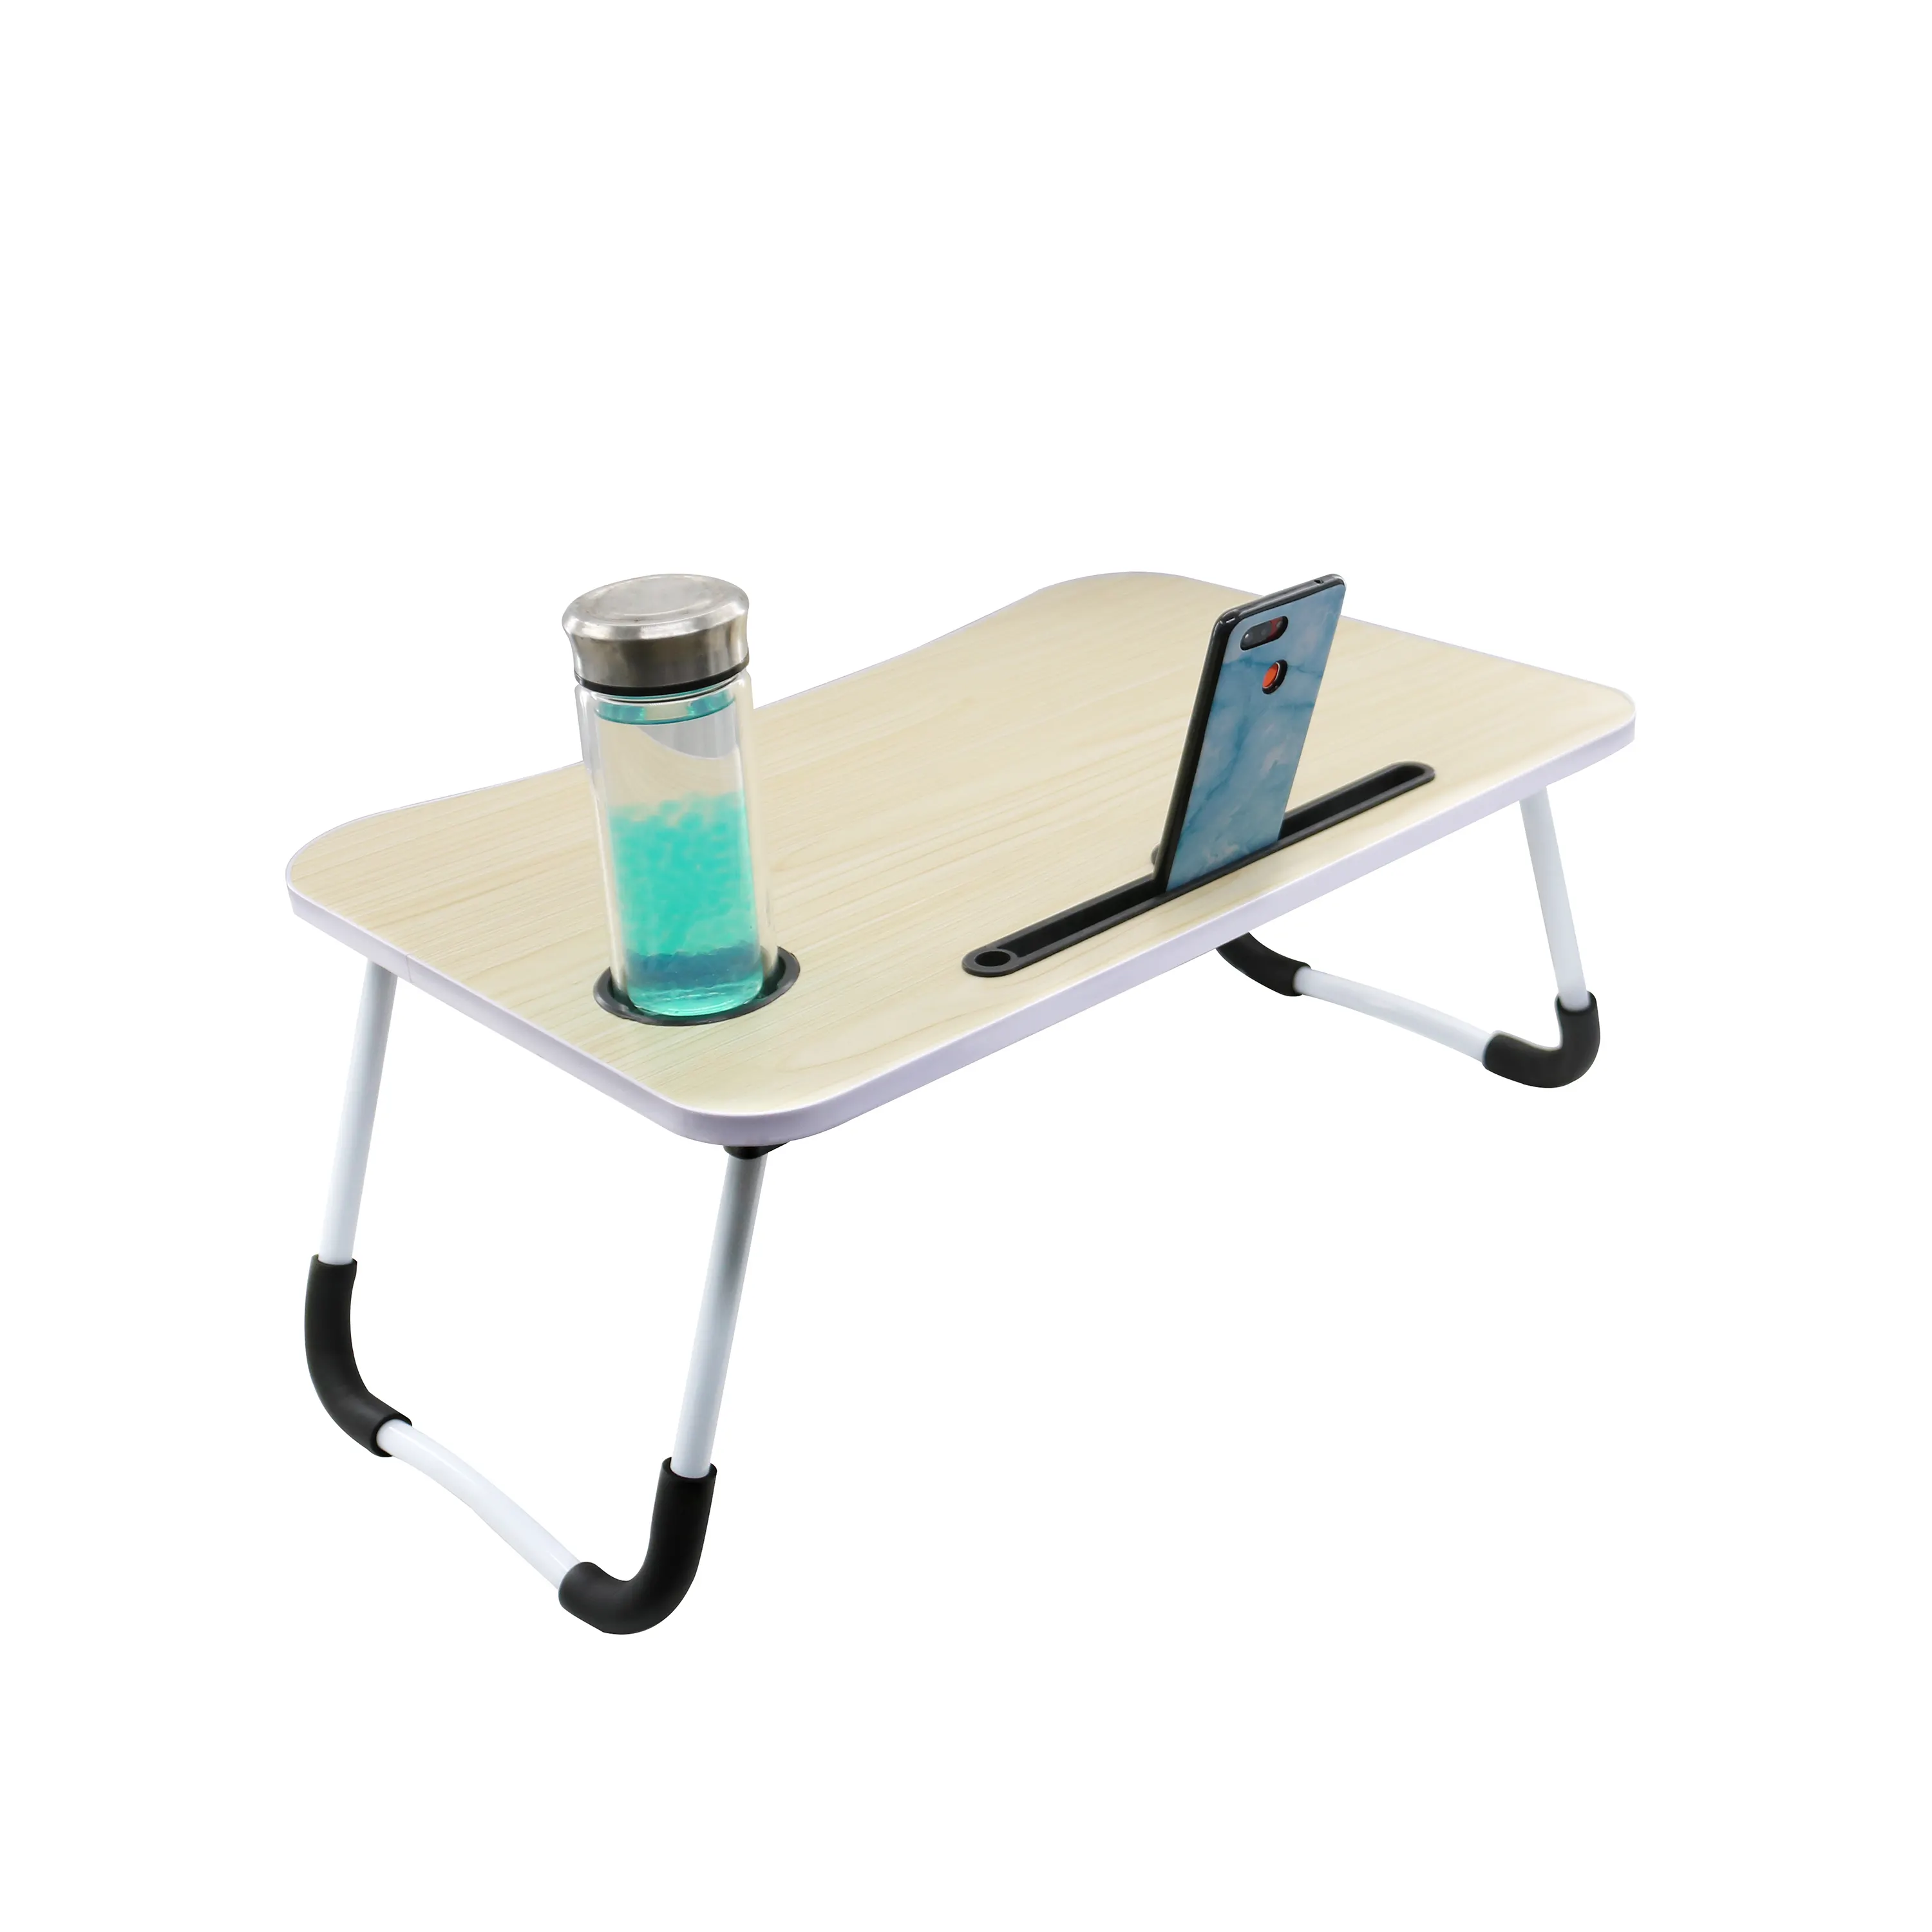 High Quality Portable MDF laptop table adjustable wood foldable computer desk wood laptop table laptop stands